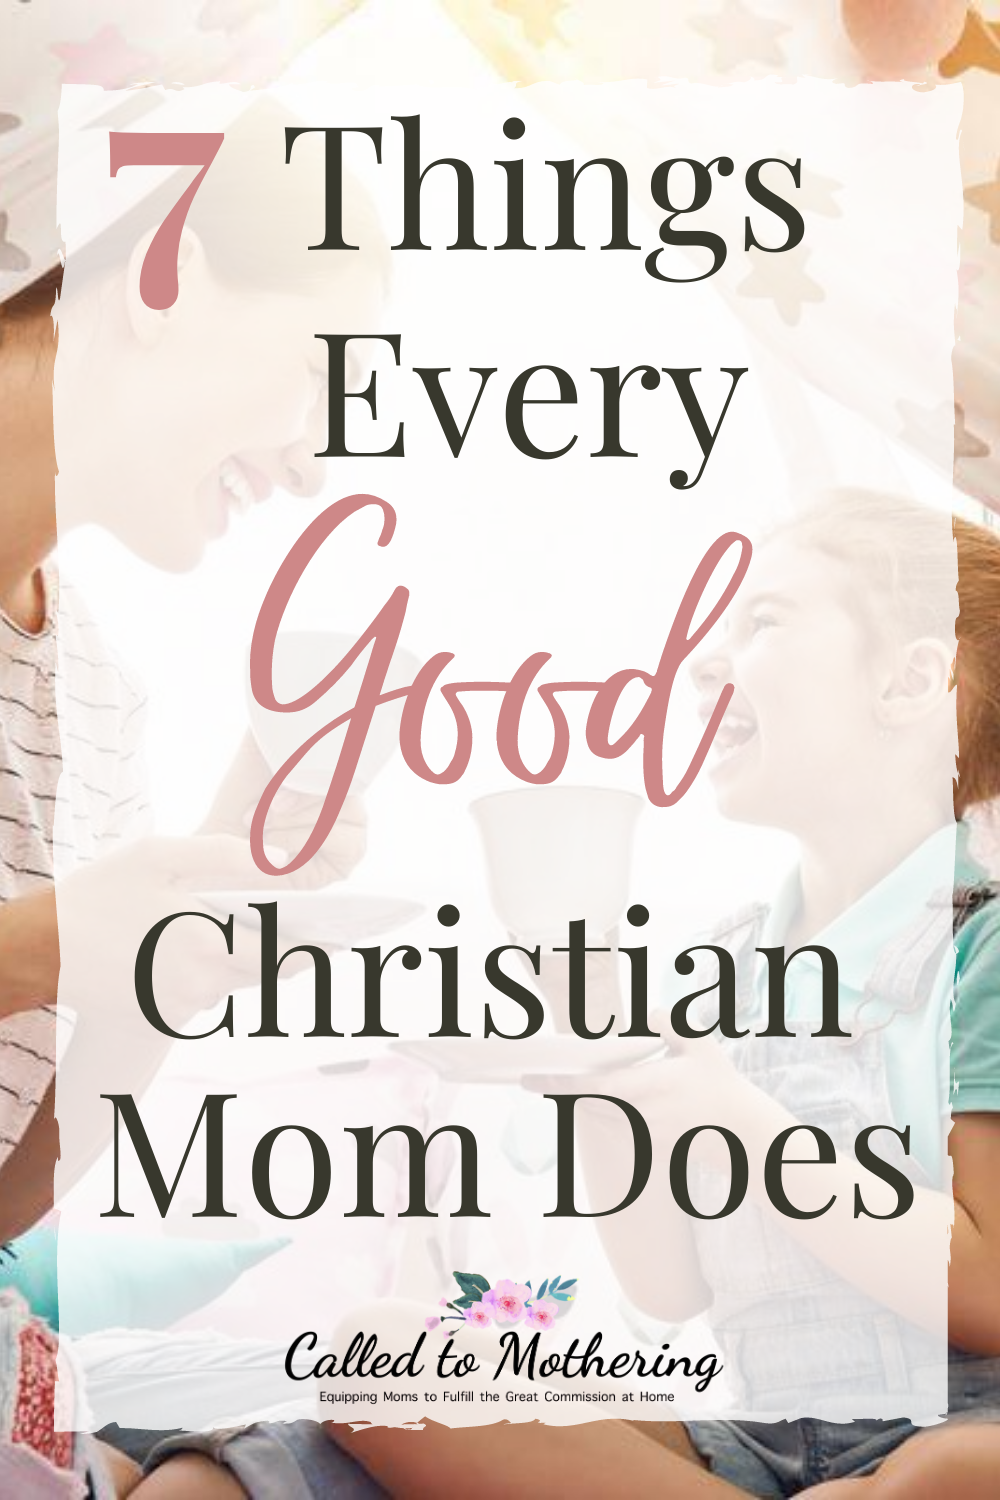 There's no way to be a perfect mom, but here are seven smart ways to be a really good one! #goodmom #christianmotherhood #momhacks #momencouragement